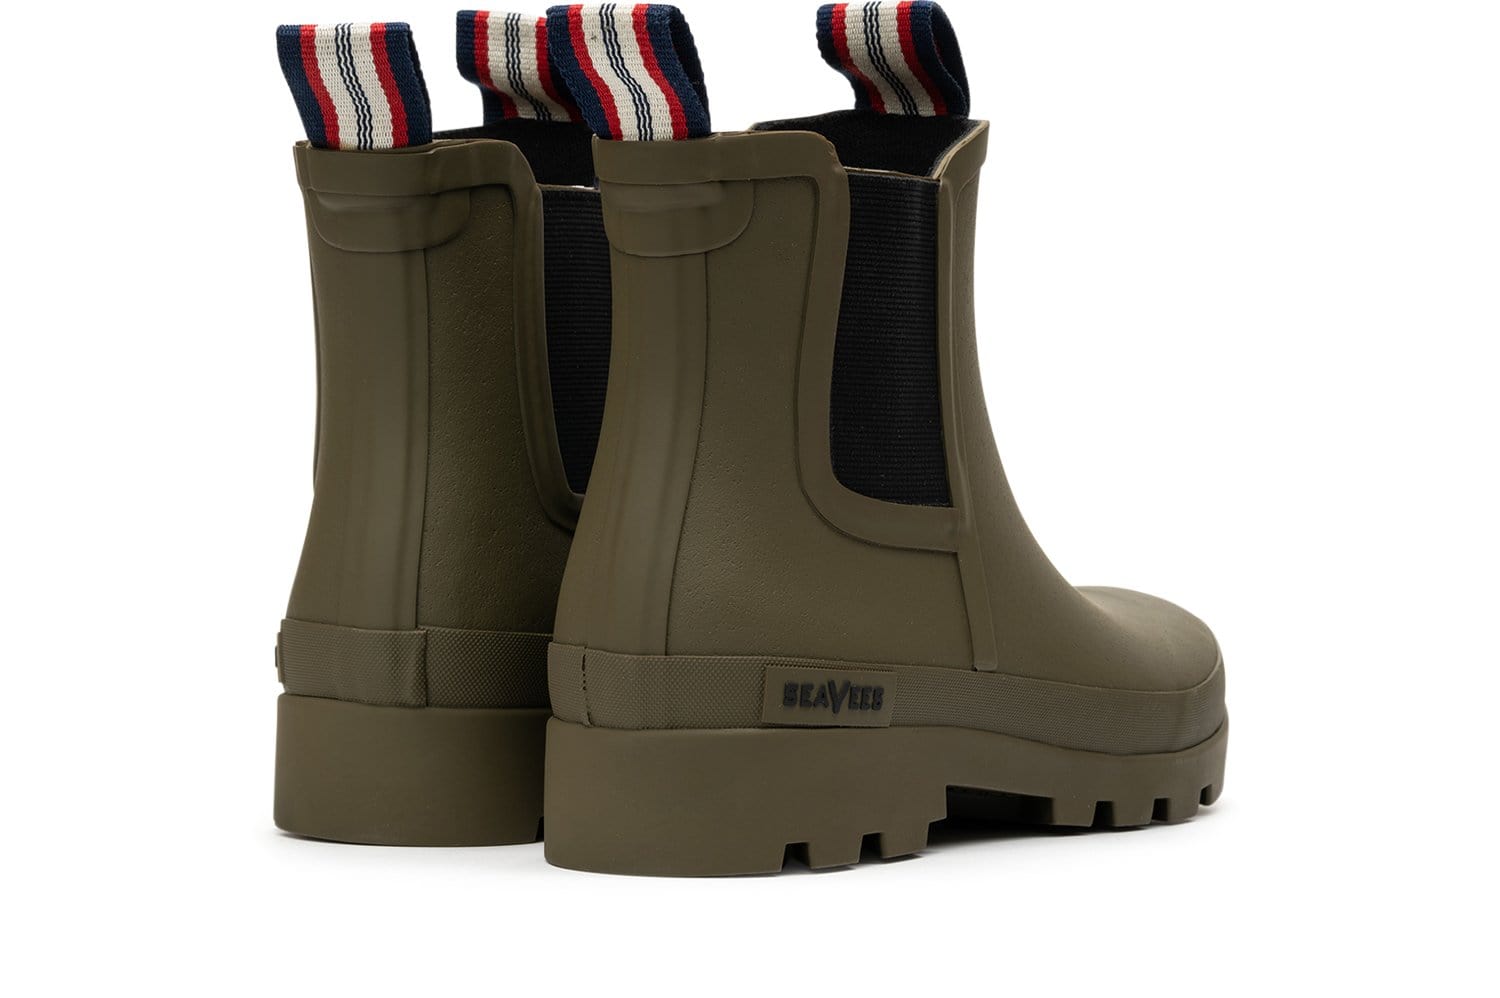 Back view of Bolinas Off Shore Boot in Military Olive, with pull tabs and branding.